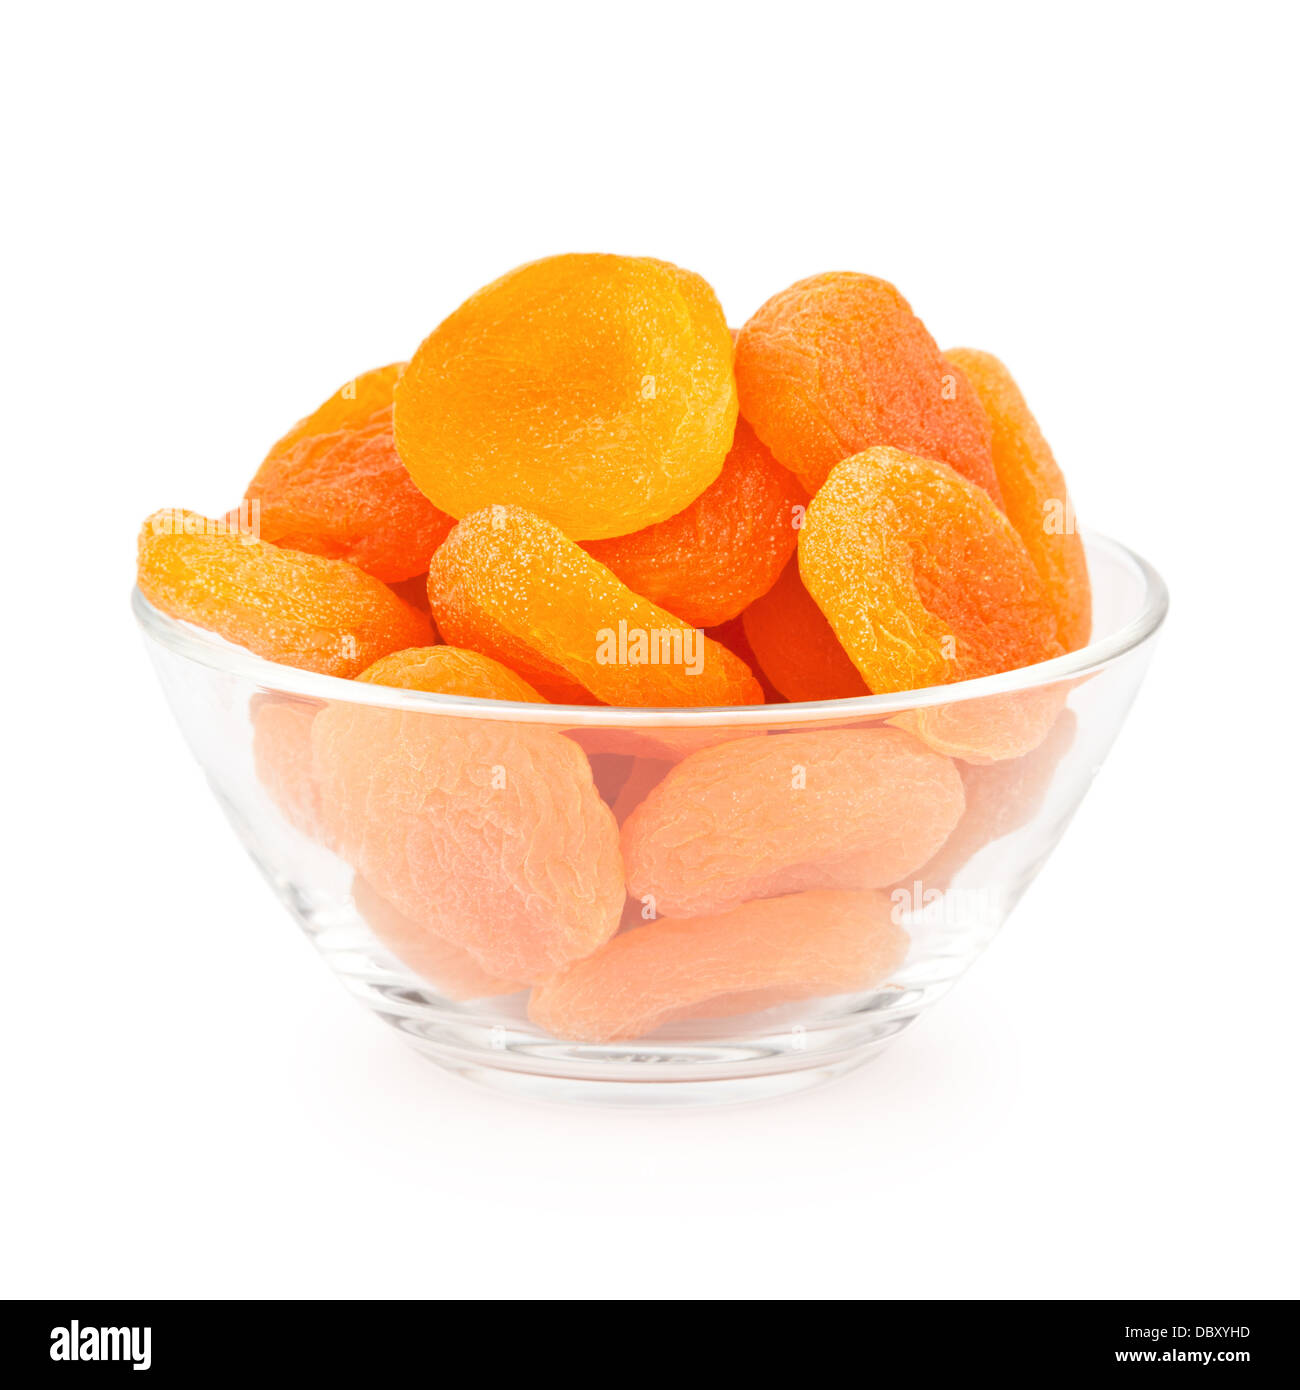 Bowl Of Dried Apricots Stock Photo